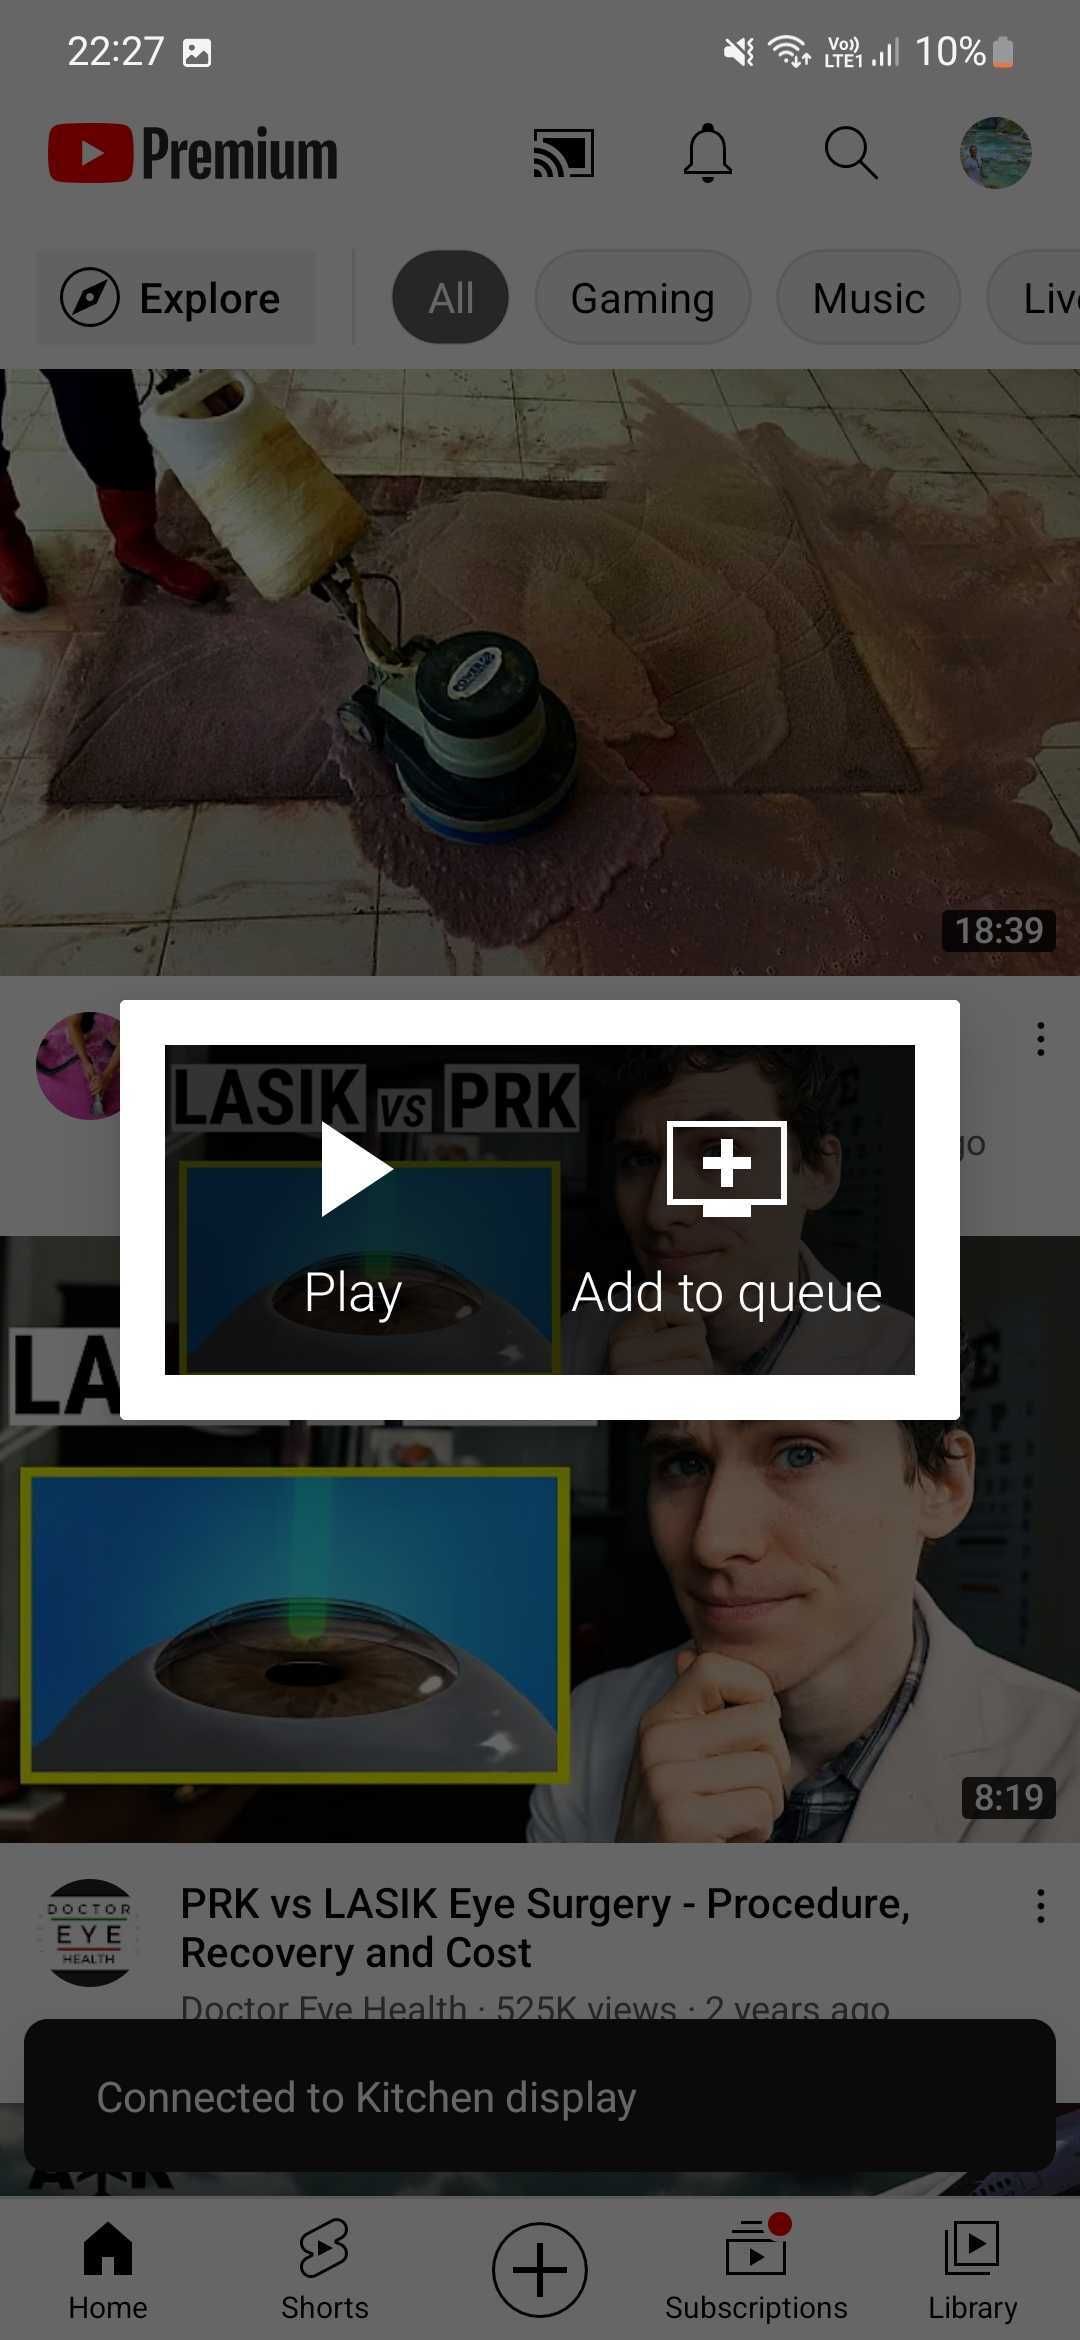 The YouTube app with tap to Play or Add to queue.